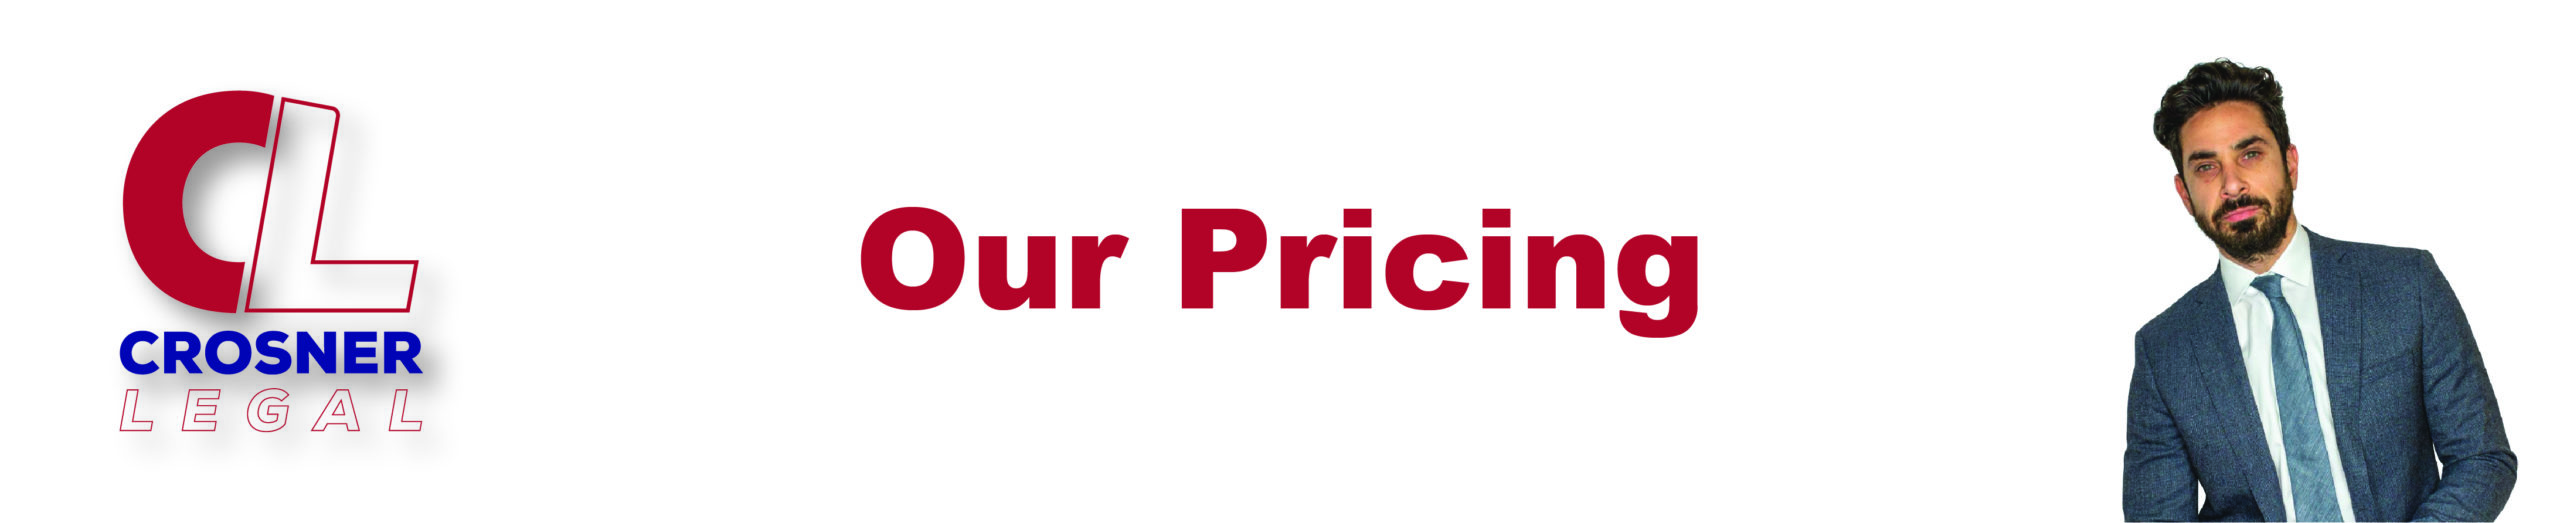 Our Pricing